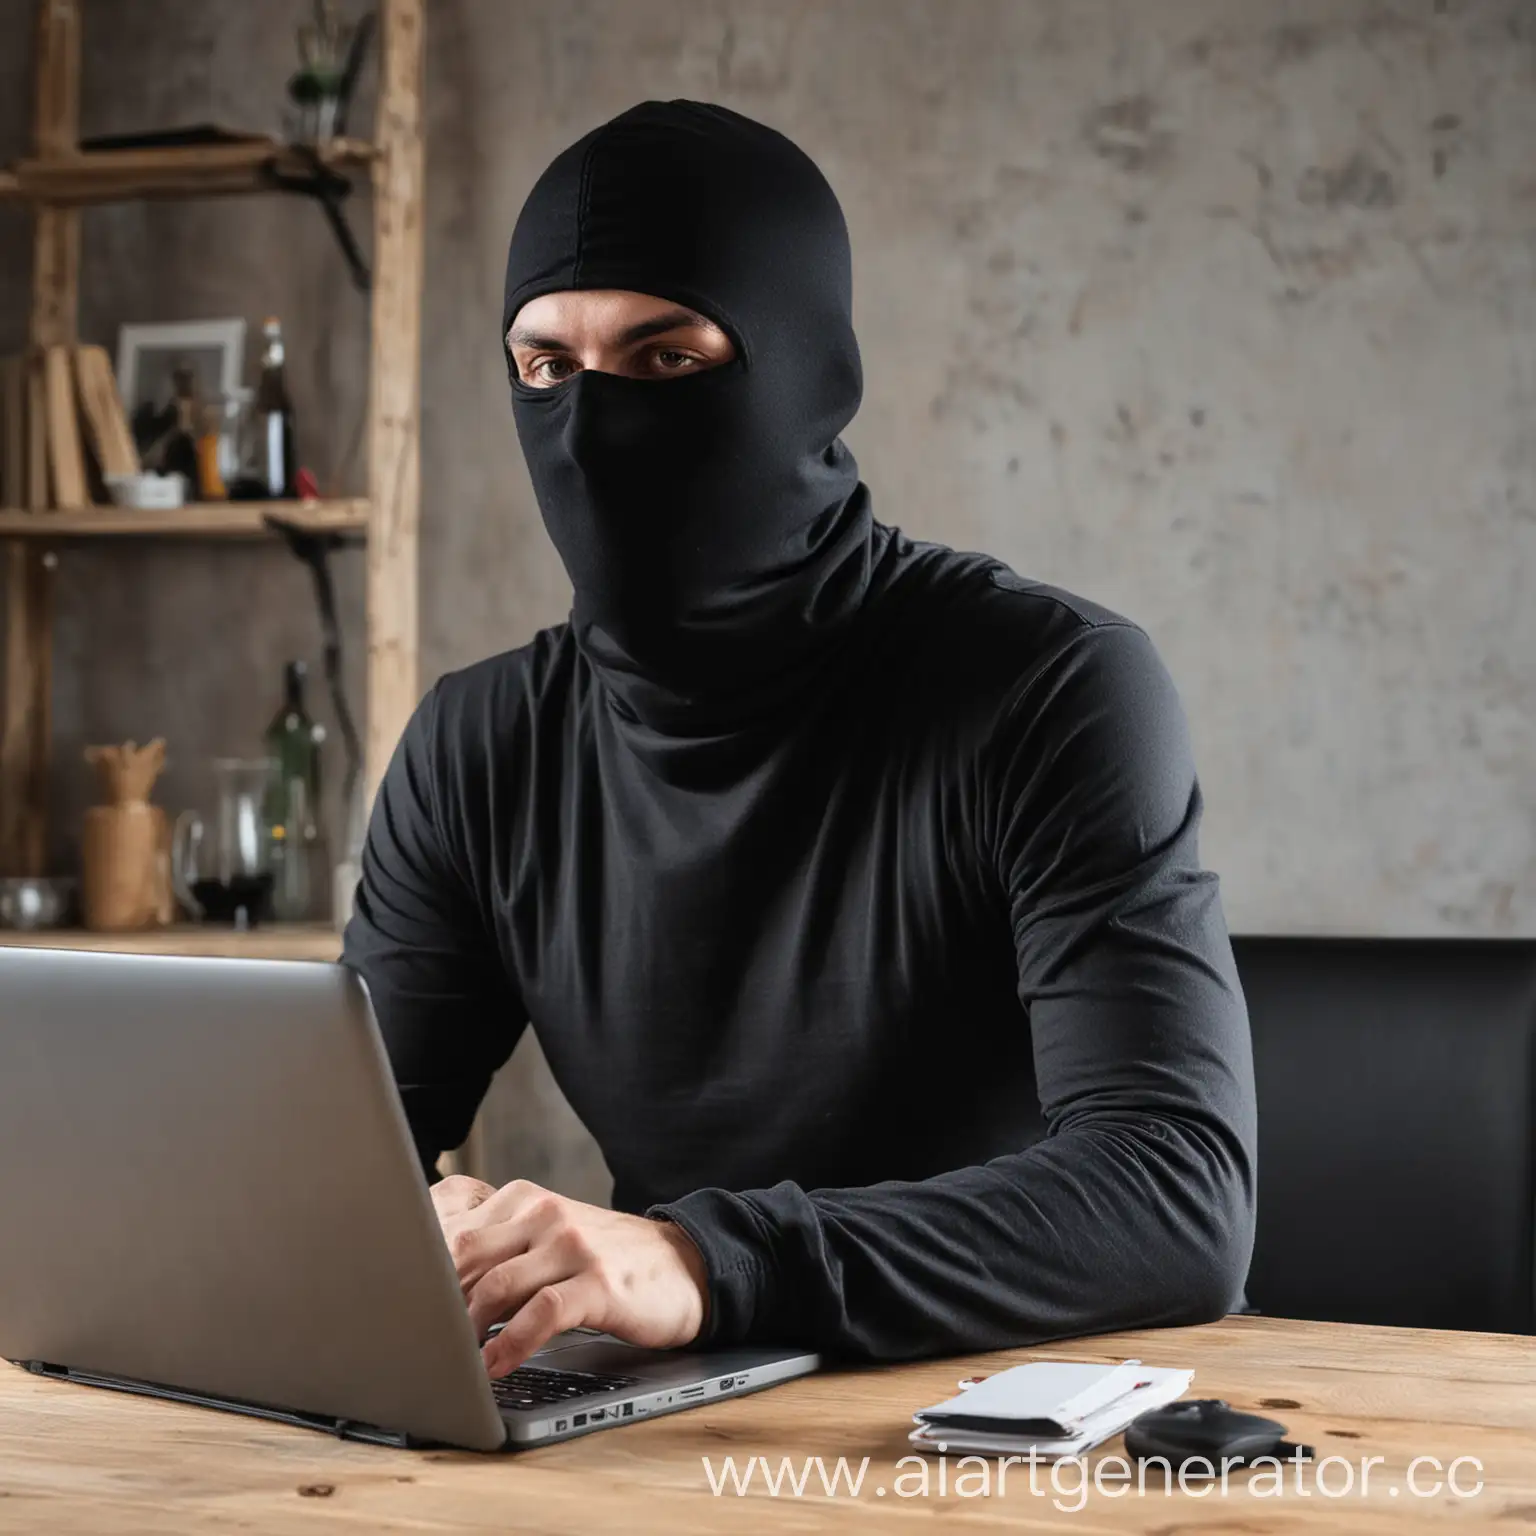 Person-Wearing-Balaclava-Working-on-Laptop-at-Table